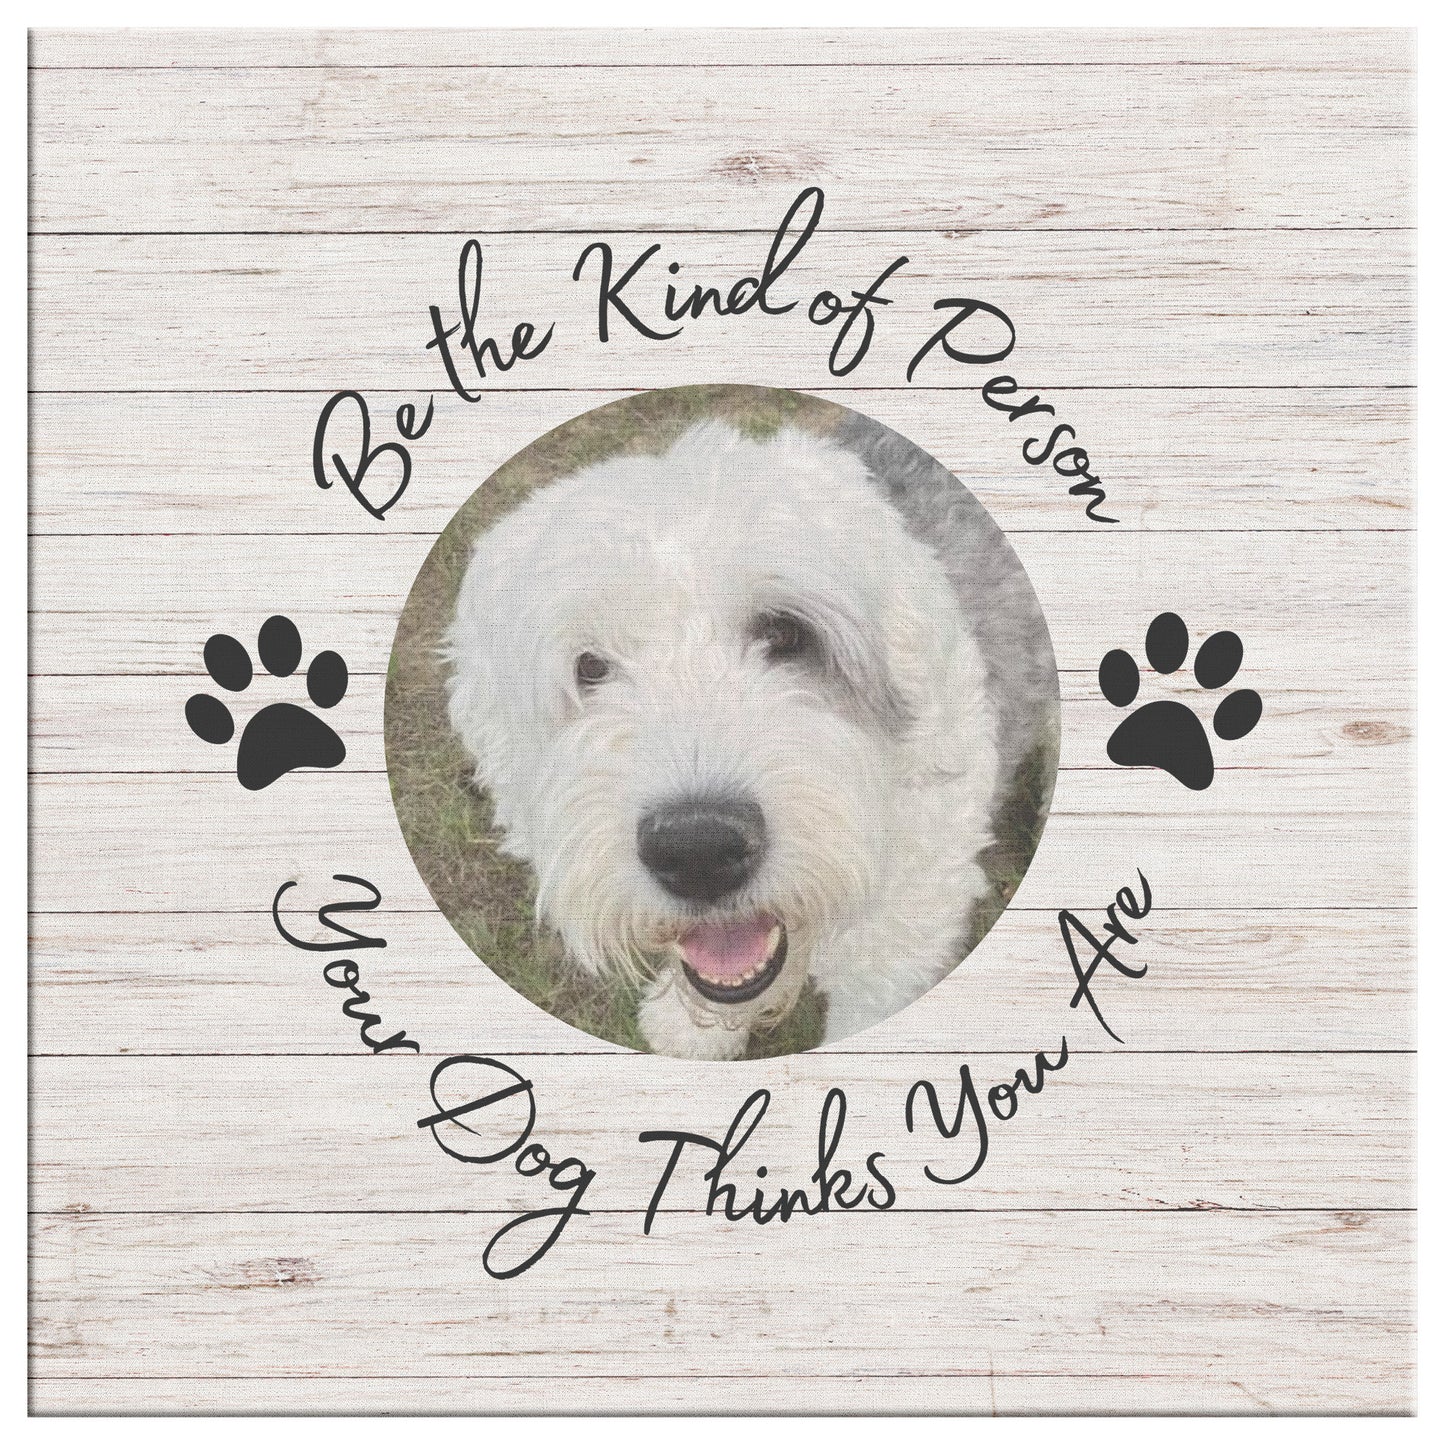 Personalized Photo "Be the Kind of Person Your Dog Thinks You Are" Canvas Wall Art